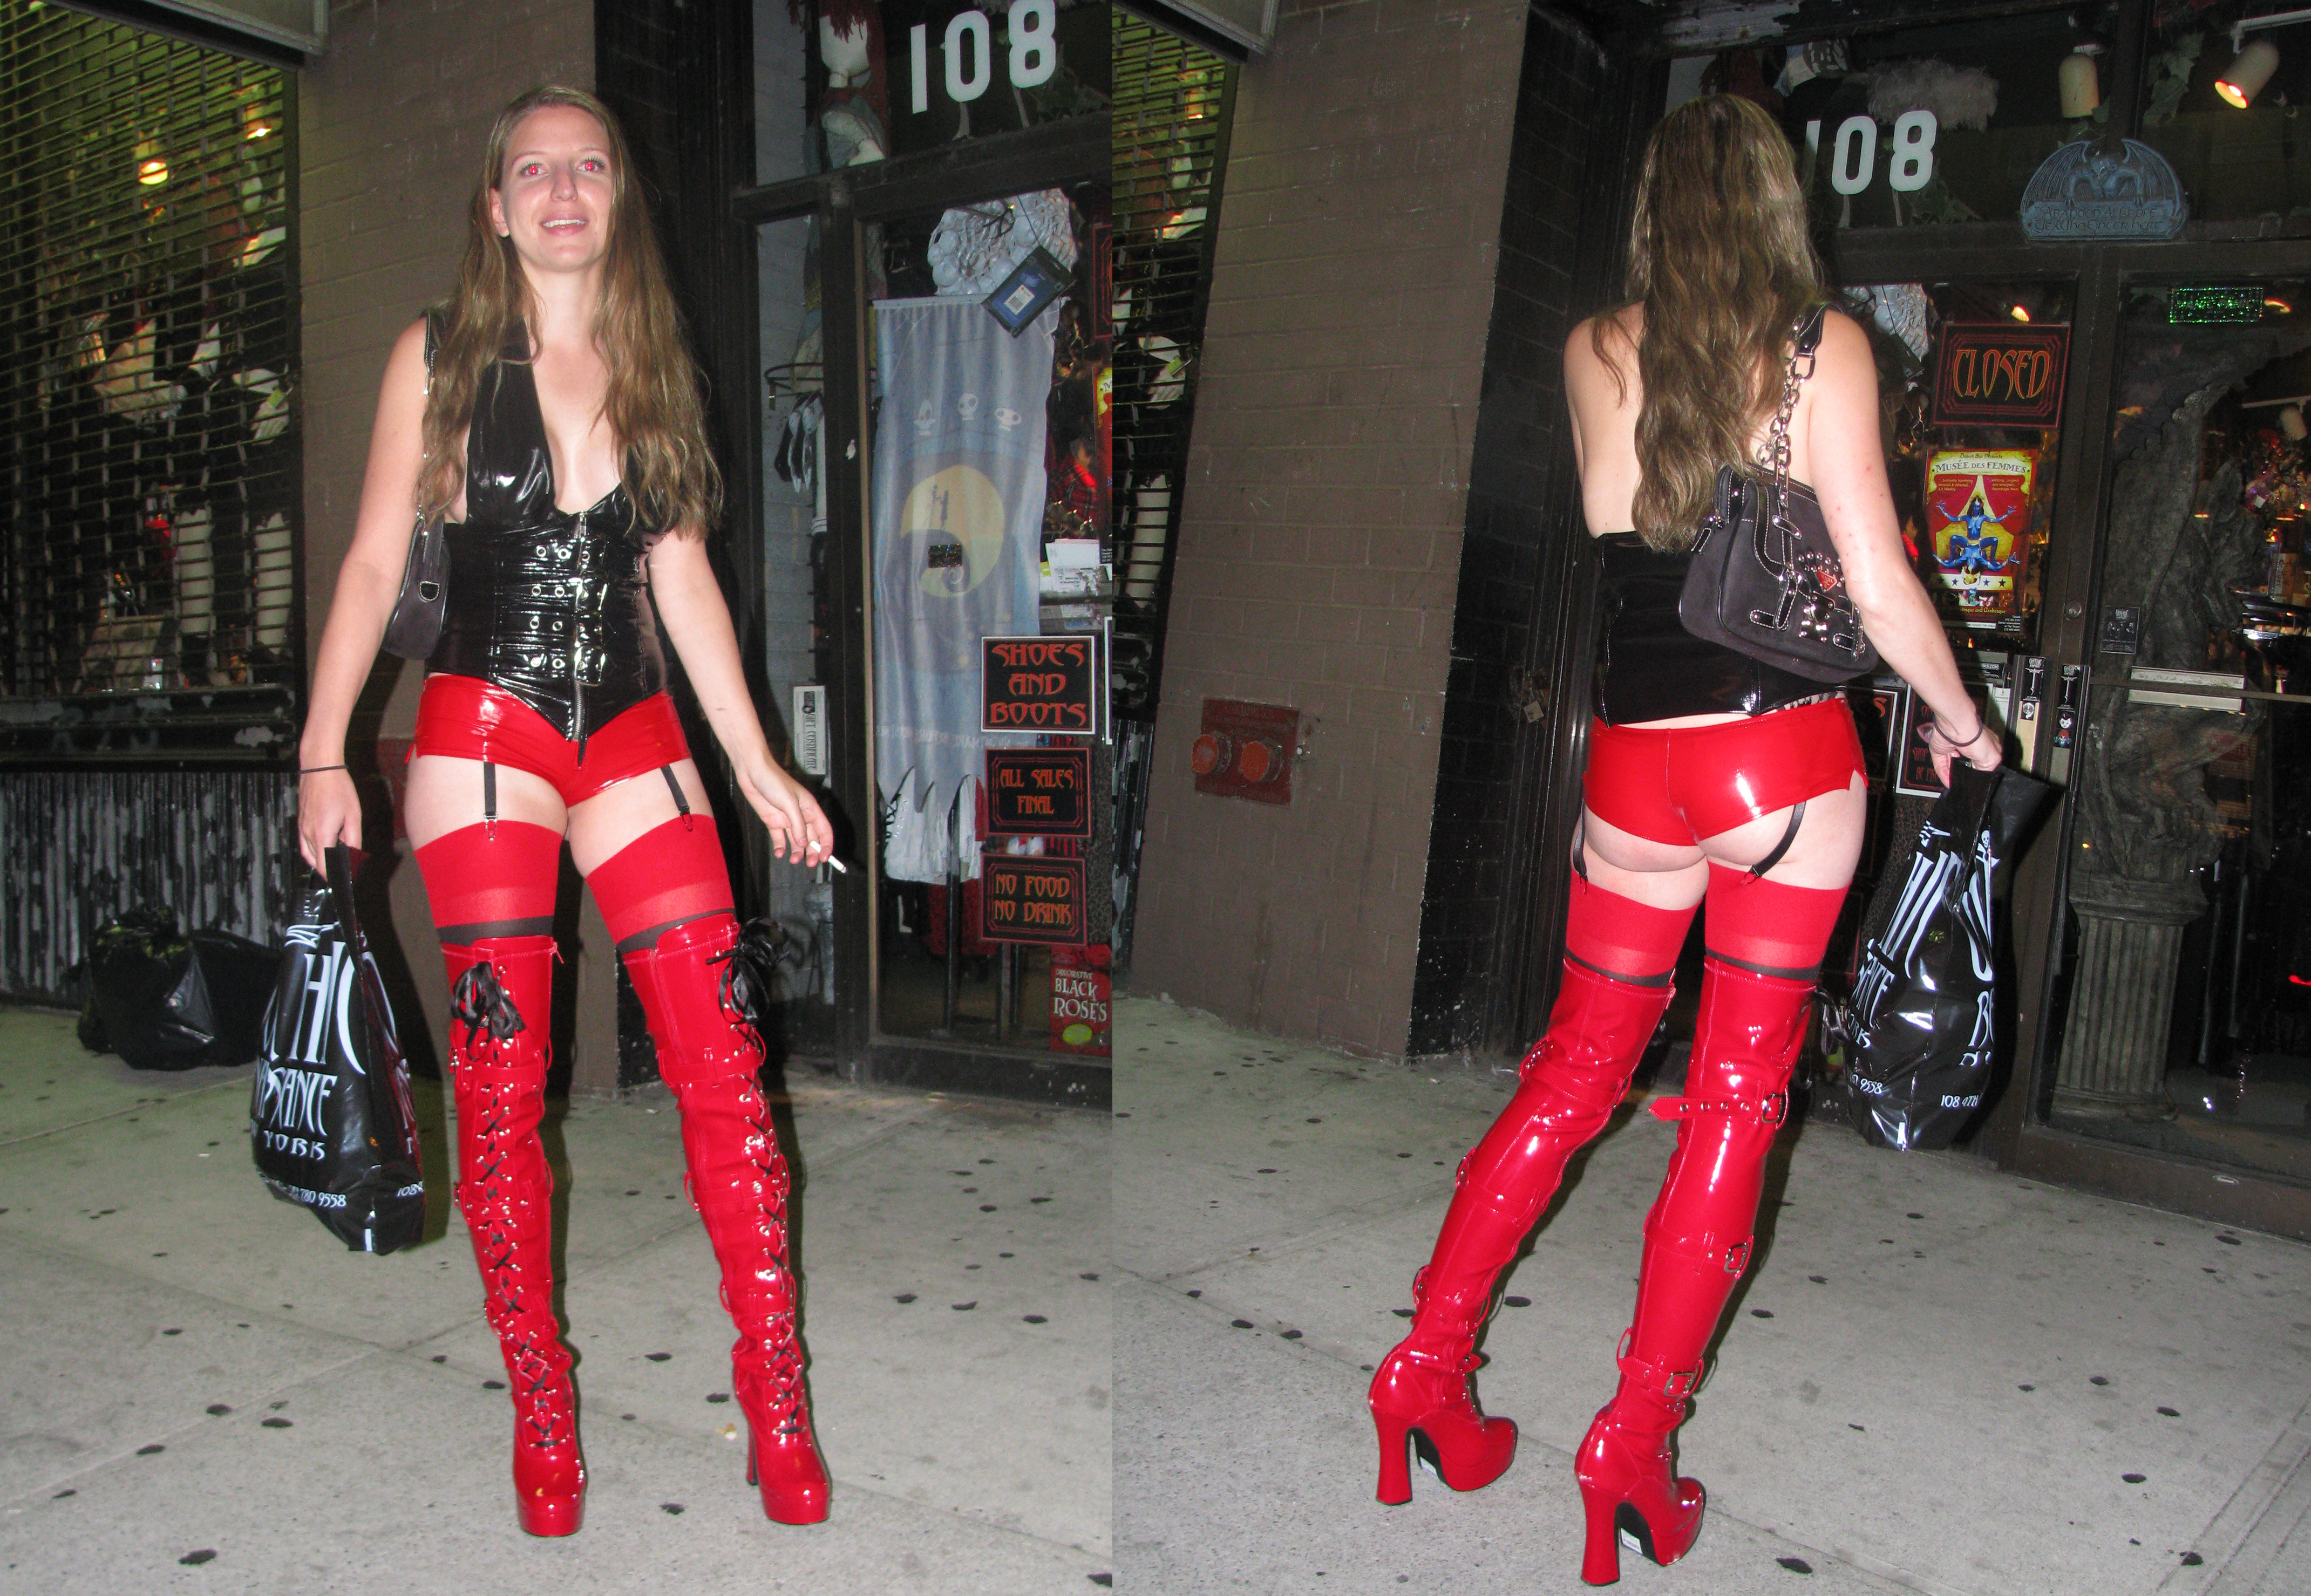 Woman in red vinyl boots & hot pants